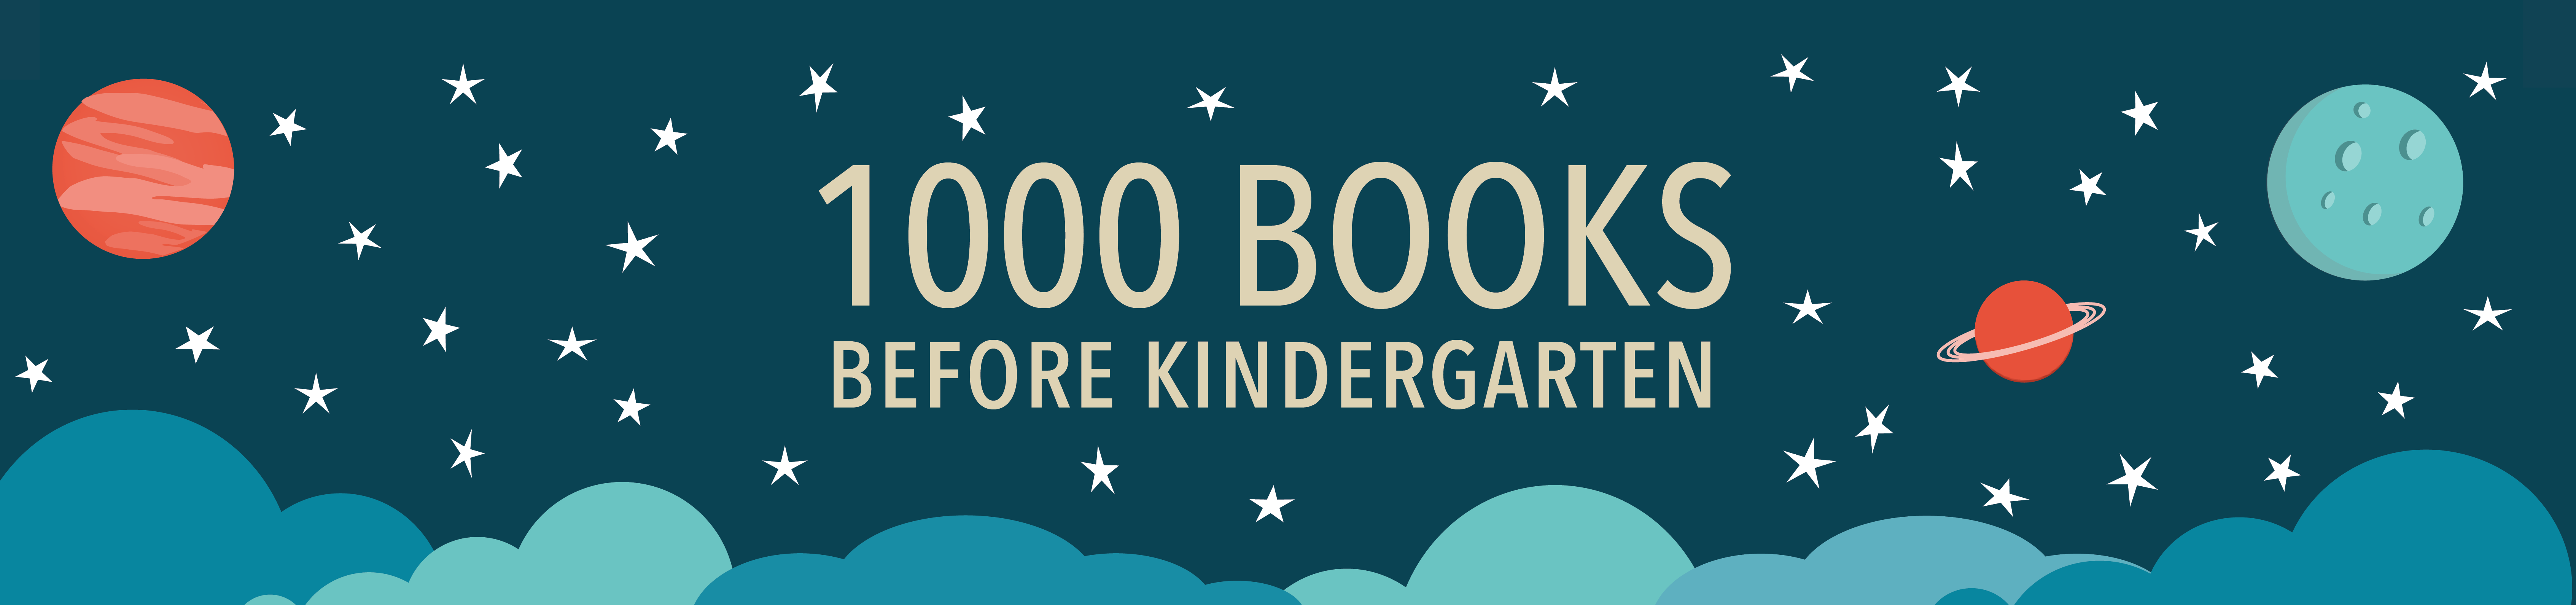 navy background with stars and planets. Text: 1000 Books Before Kindergarten